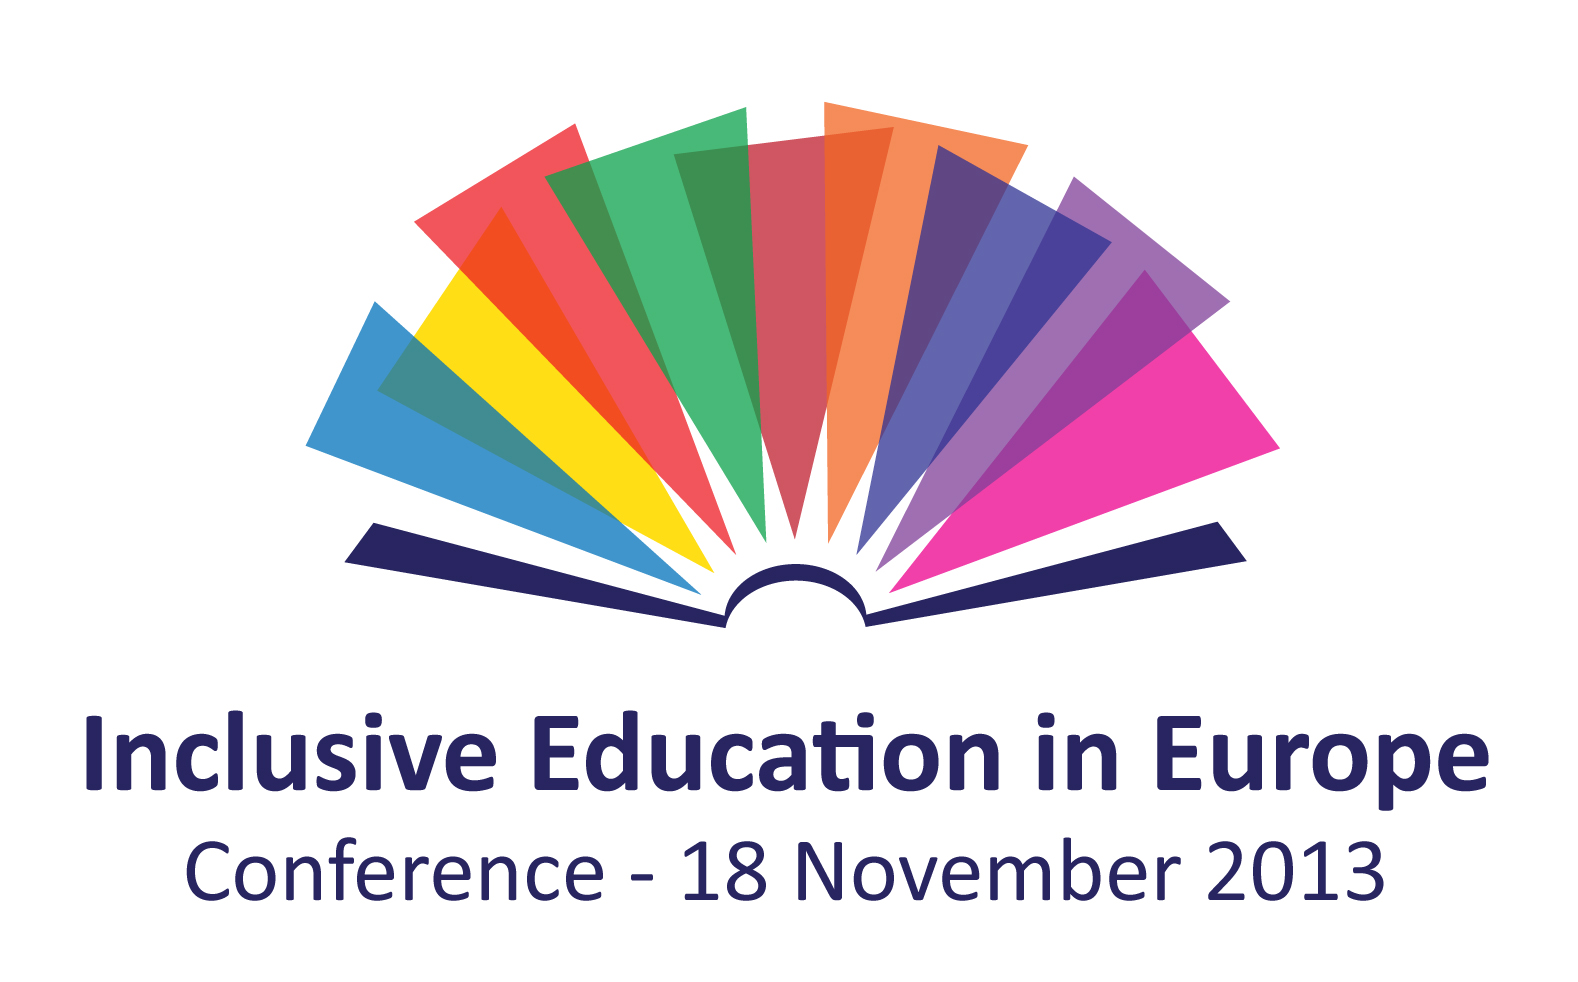 Discussing Inclusive Education in Europe